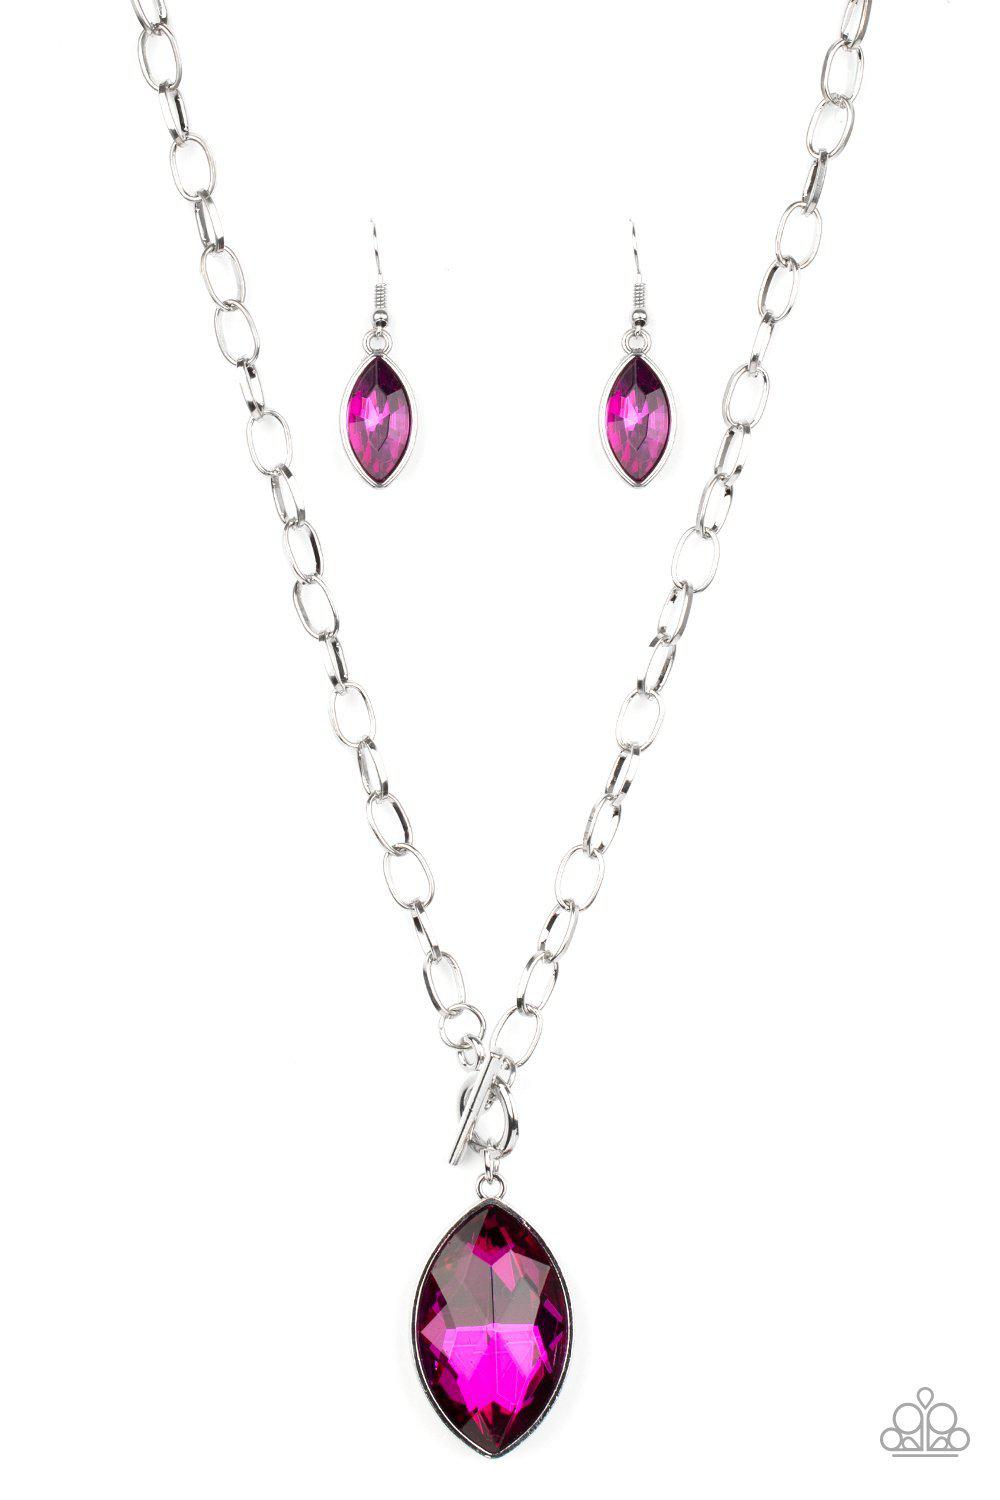 Unlimited Sparkle - Pink Necklace - Paparazzi - Dare2bdazzlin N Jewelry